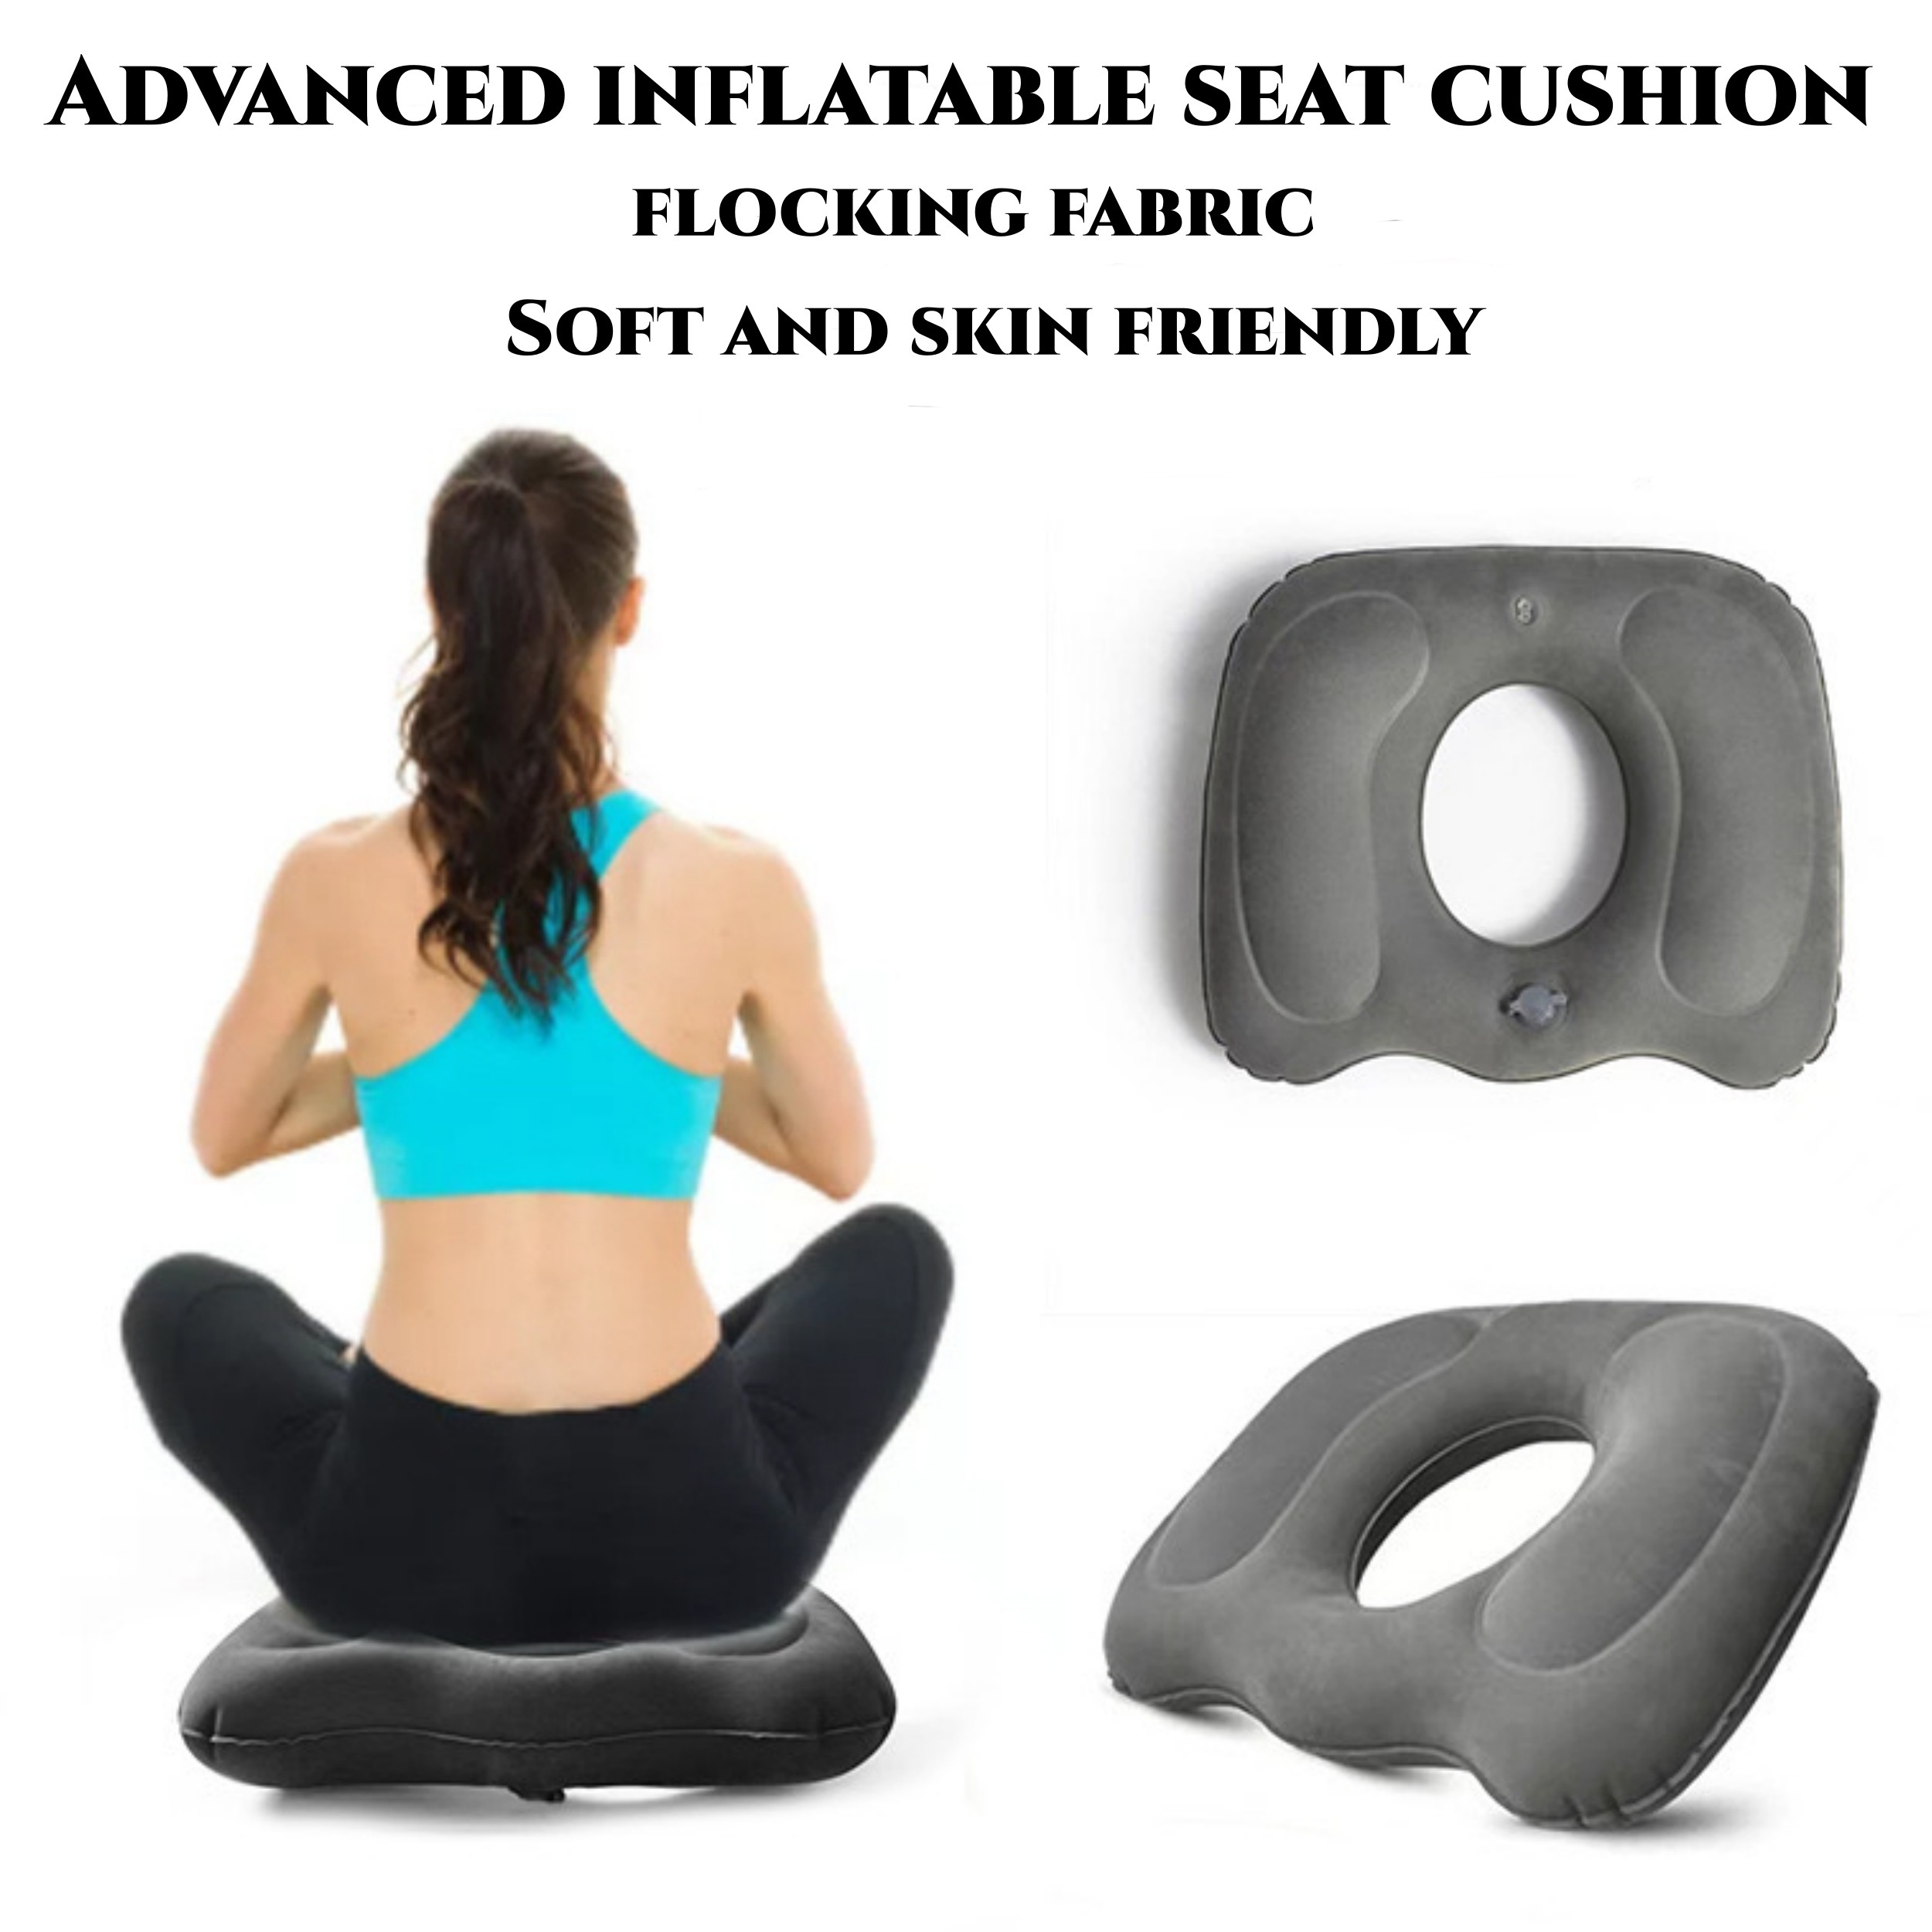 Coccyx Cushion Slow Rebound Memory Cotton Round Hip Pads Seat Donut Cushion for Relief from Sitting Back Pain Sores, Size: 1pcs, Black